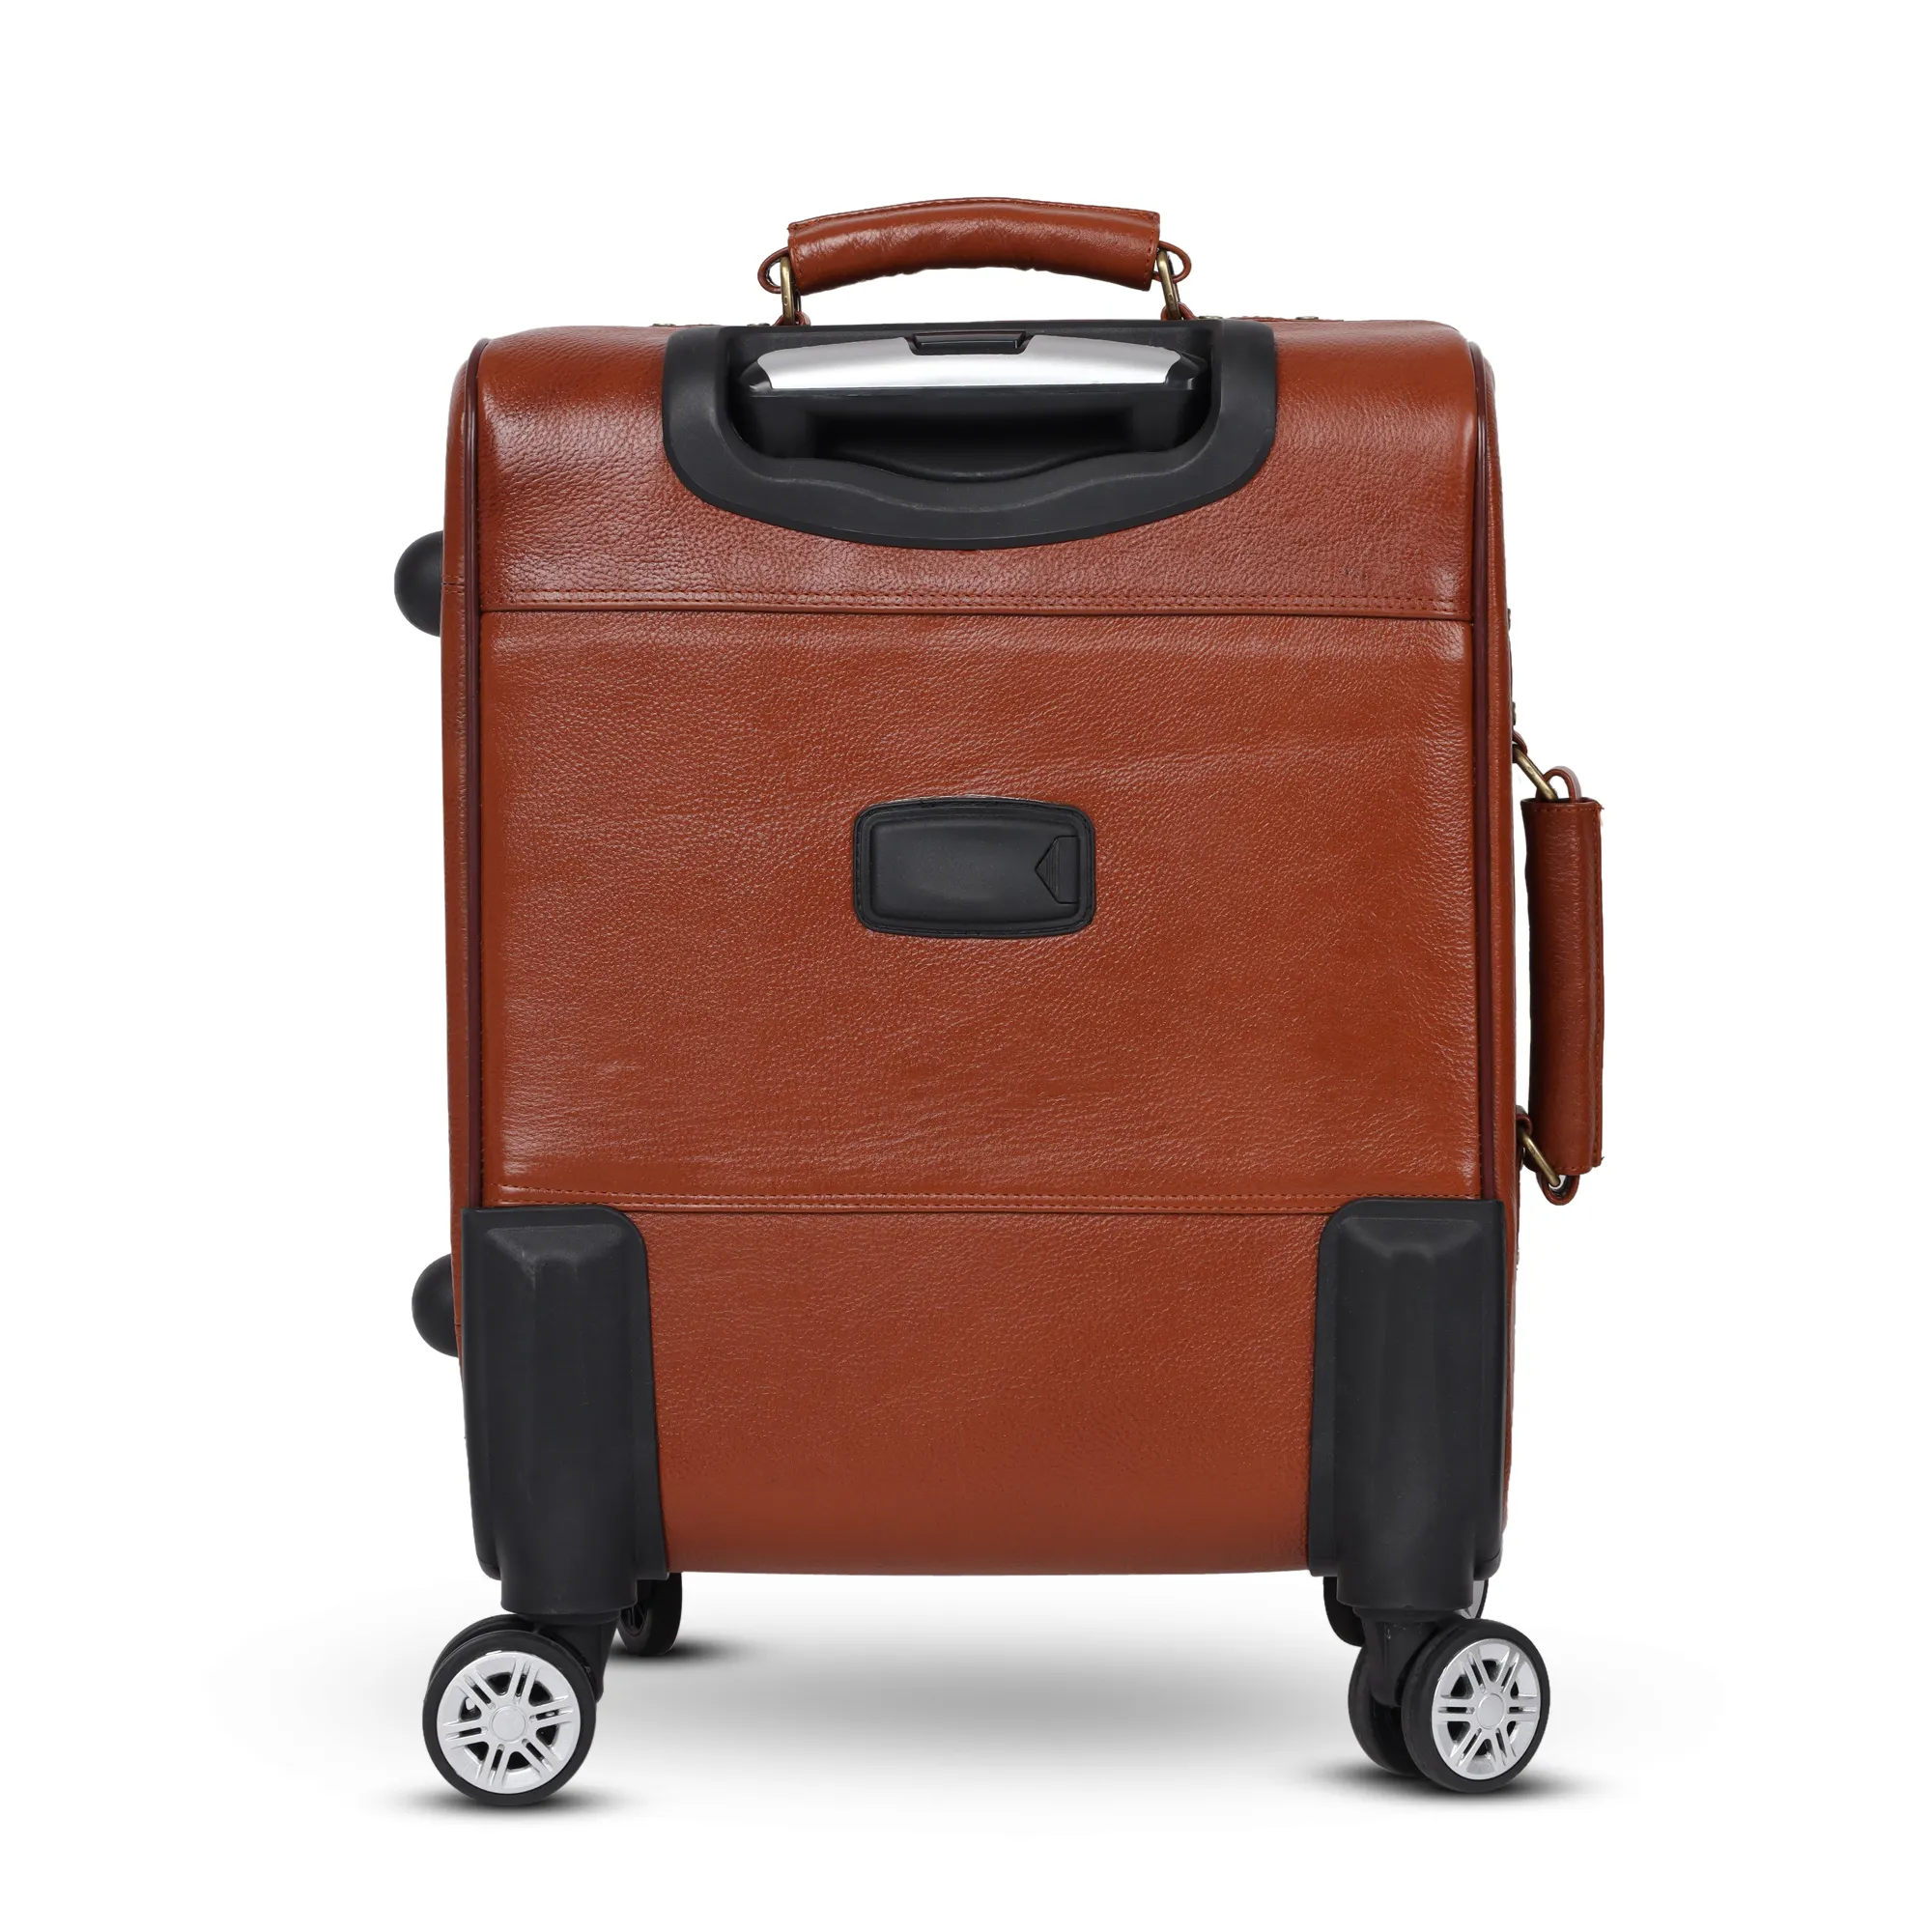 OEM Suitcase Premium High Quality 100% Genuine Leather Trolley Travel Luggage Suitcases Trolley Bag long lasting material